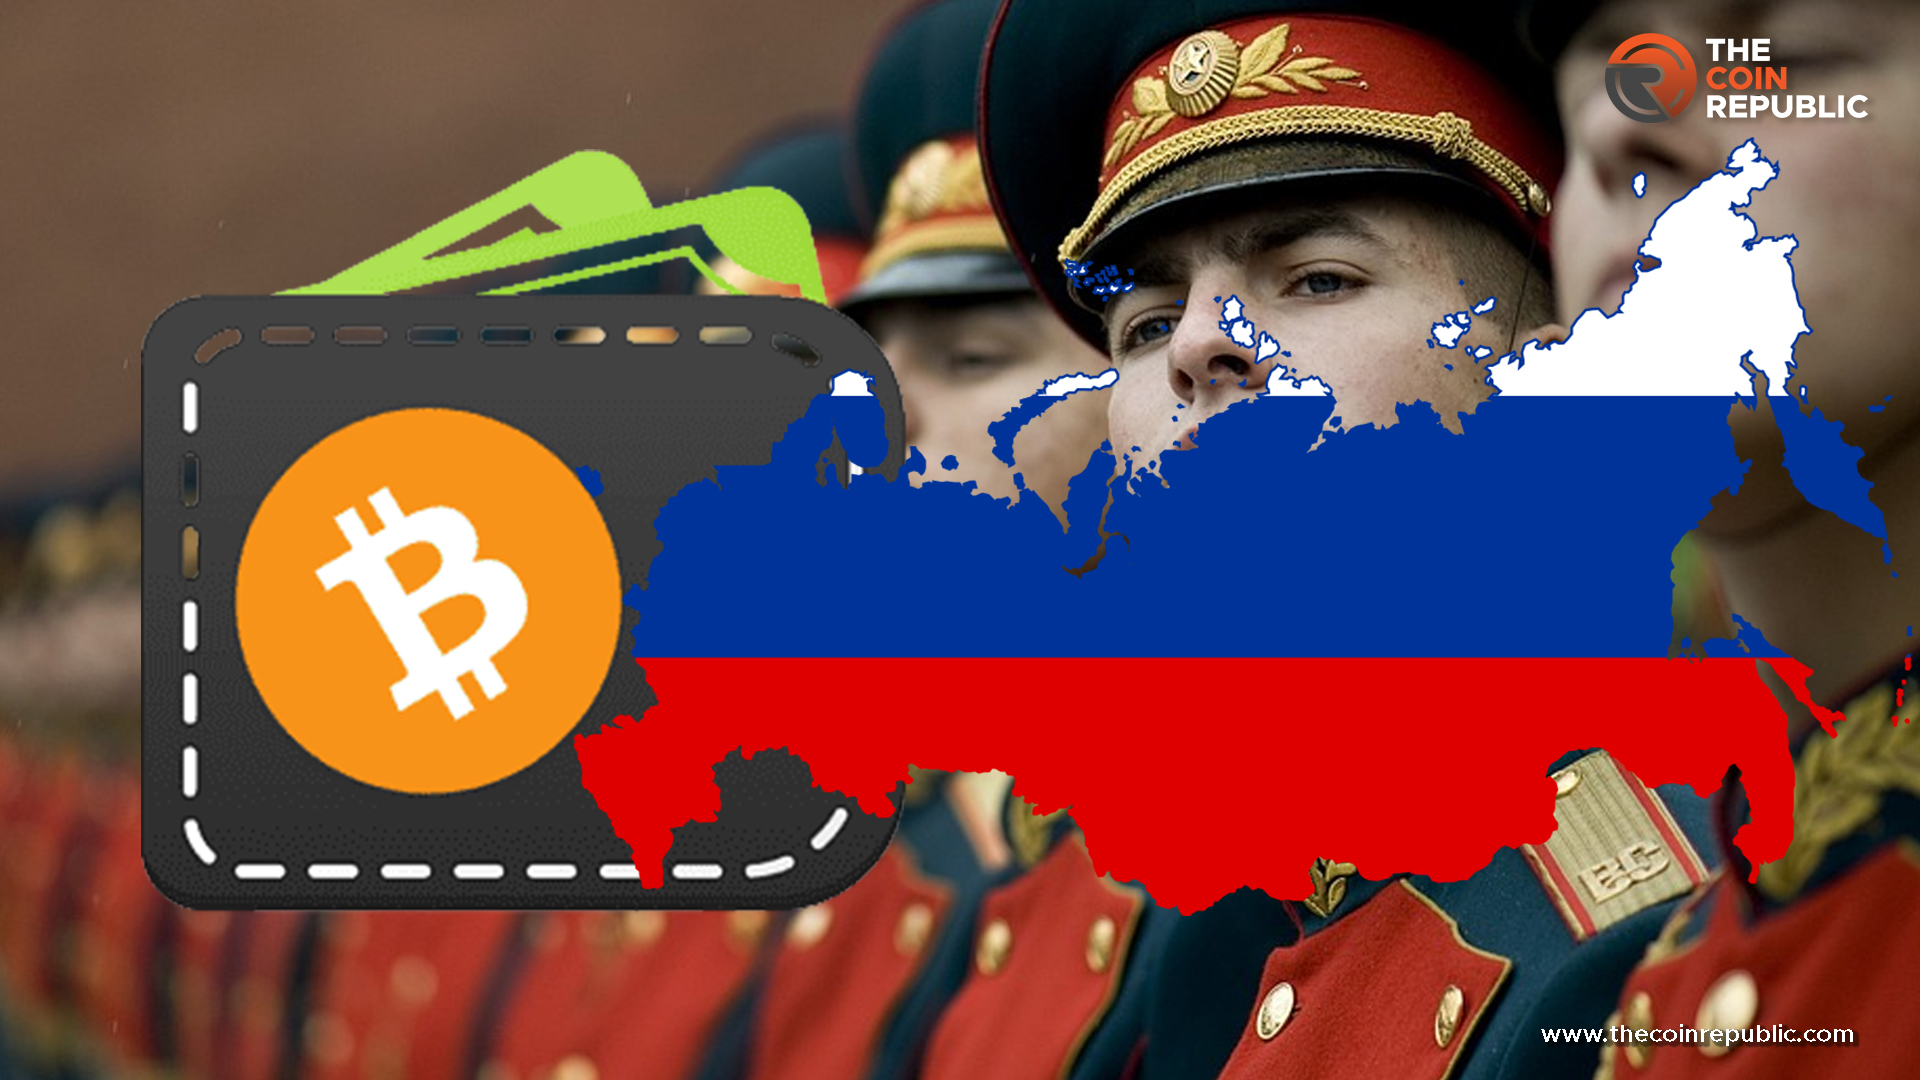 Crypto Wallet Activities Under Watch of Russian Ministry